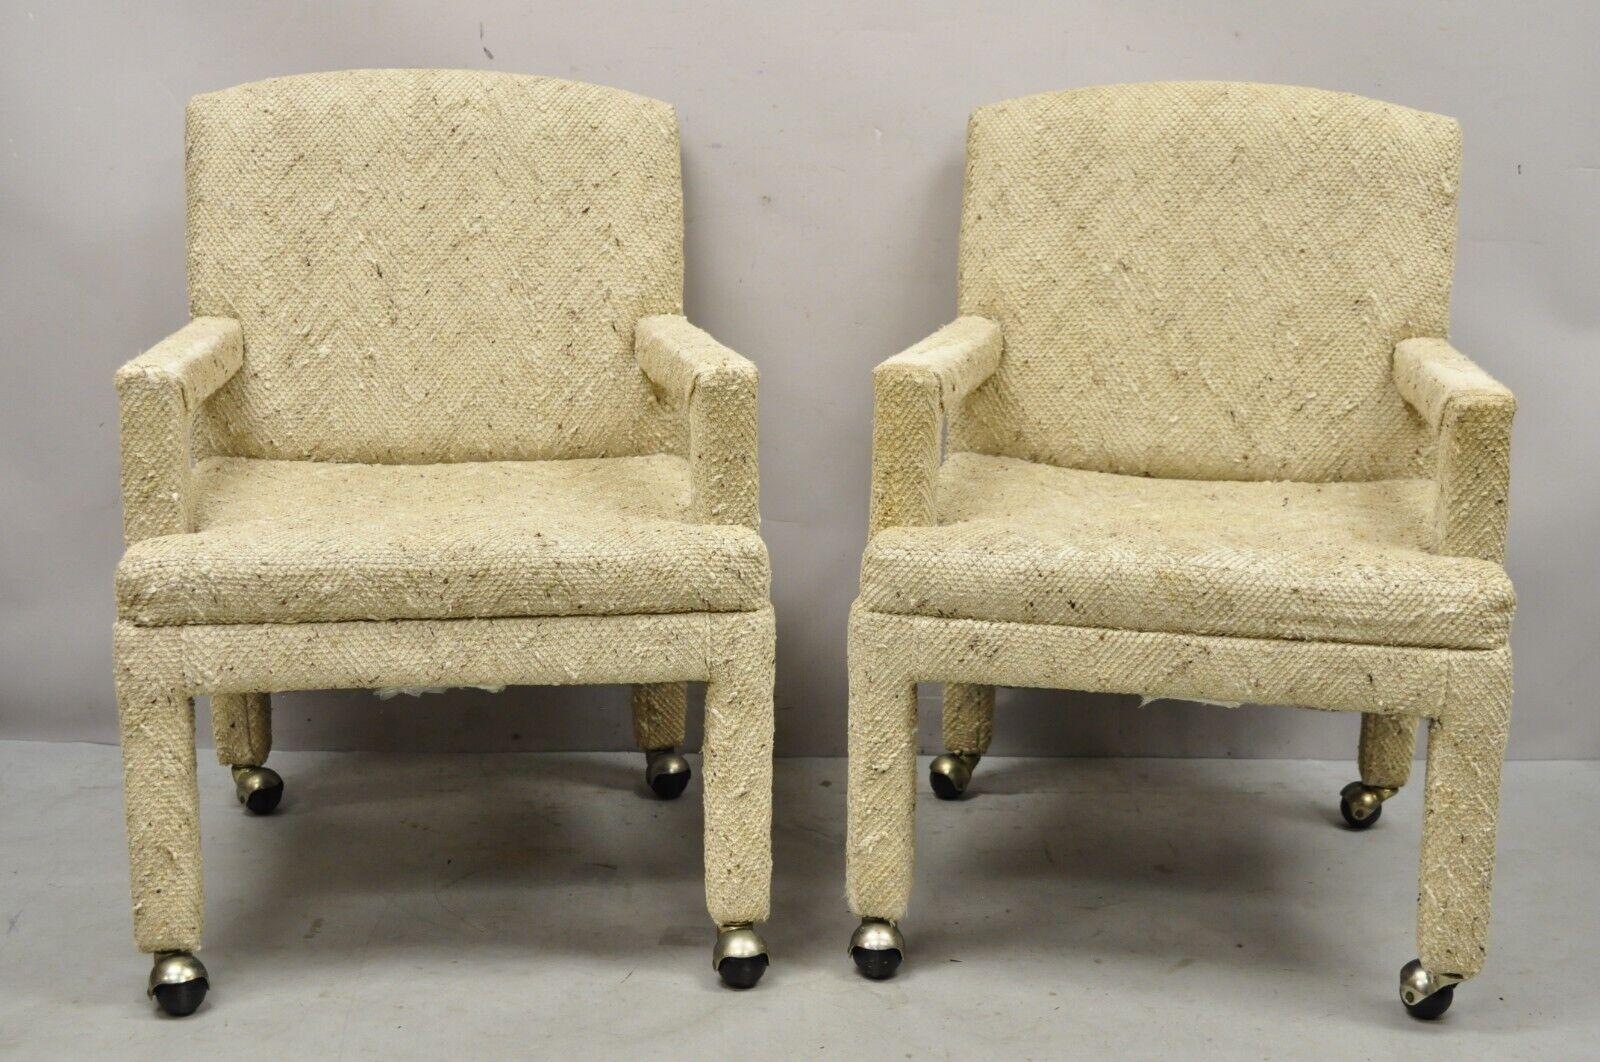 Pair Vintage Bassett Furniture fully upholstered parson style club lounge chairs. Item features rolling casters, fully upholstered beige nubby wool fabric, original label, very nice vintage pair, clean modernist lines. Circa late 20th century.